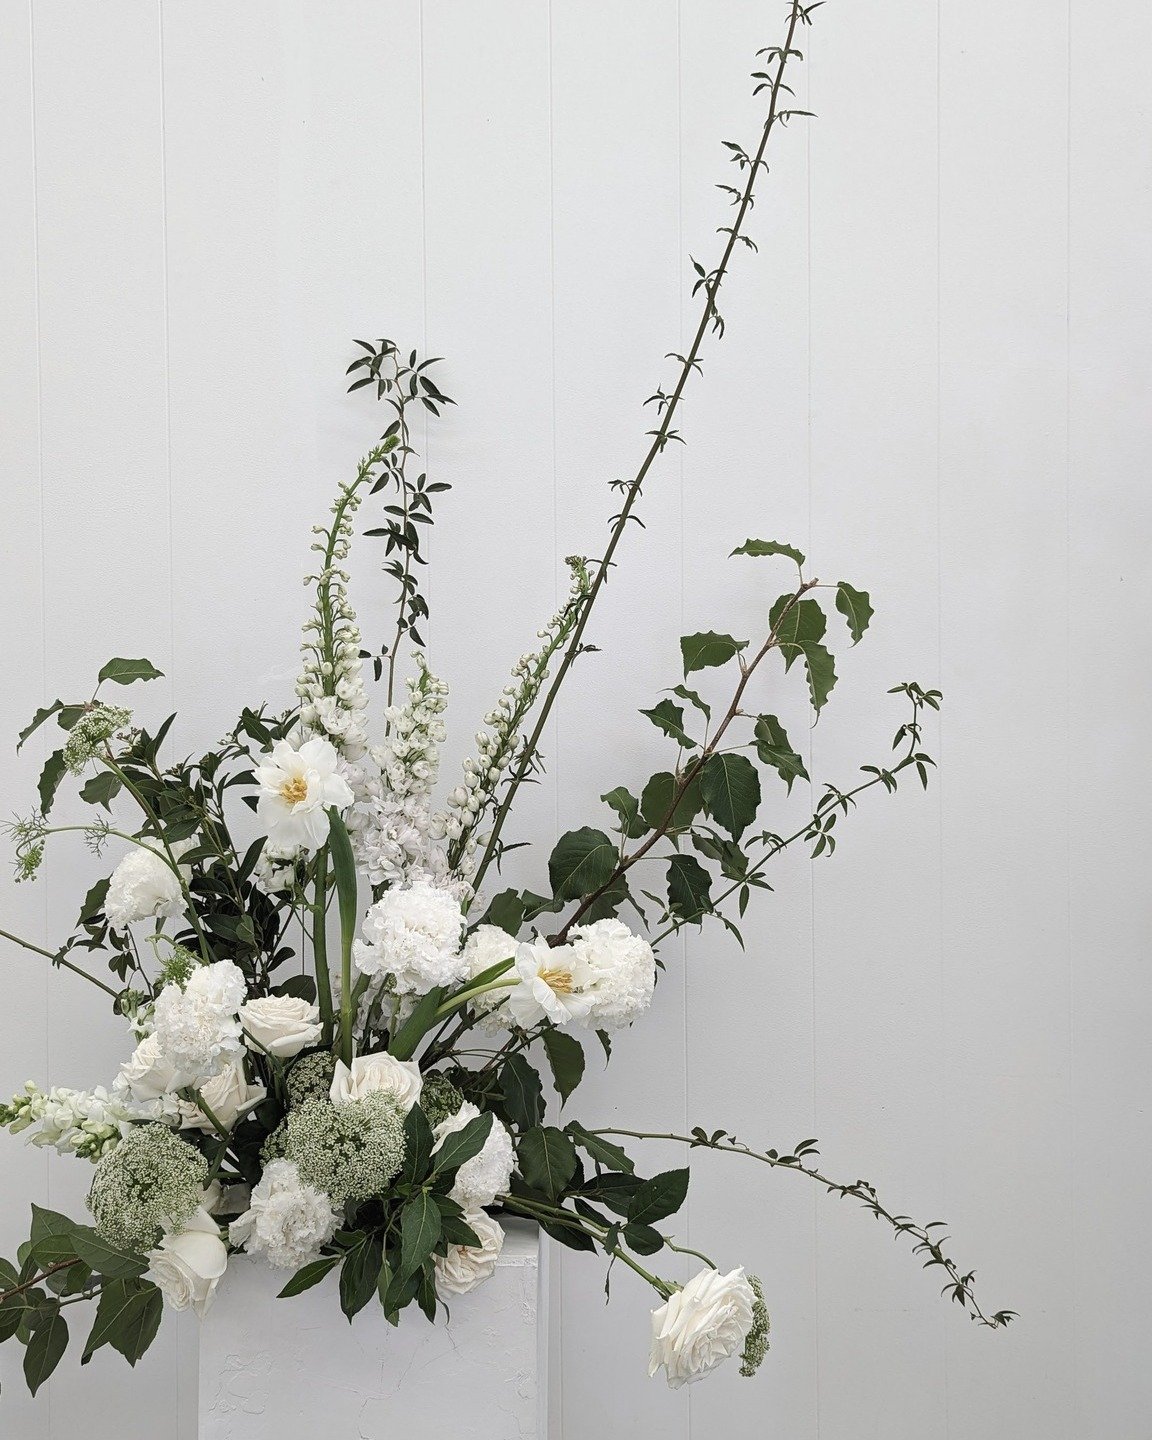 A whole lot of wild and a touch of whimsy for Emily &amp; Petar. 

This was just one of SIX arrangements that went into their statement bridal table set-up. We can't wait to show you the whole thing!

#perthflorist #perthflowers #perthweddingflowers 